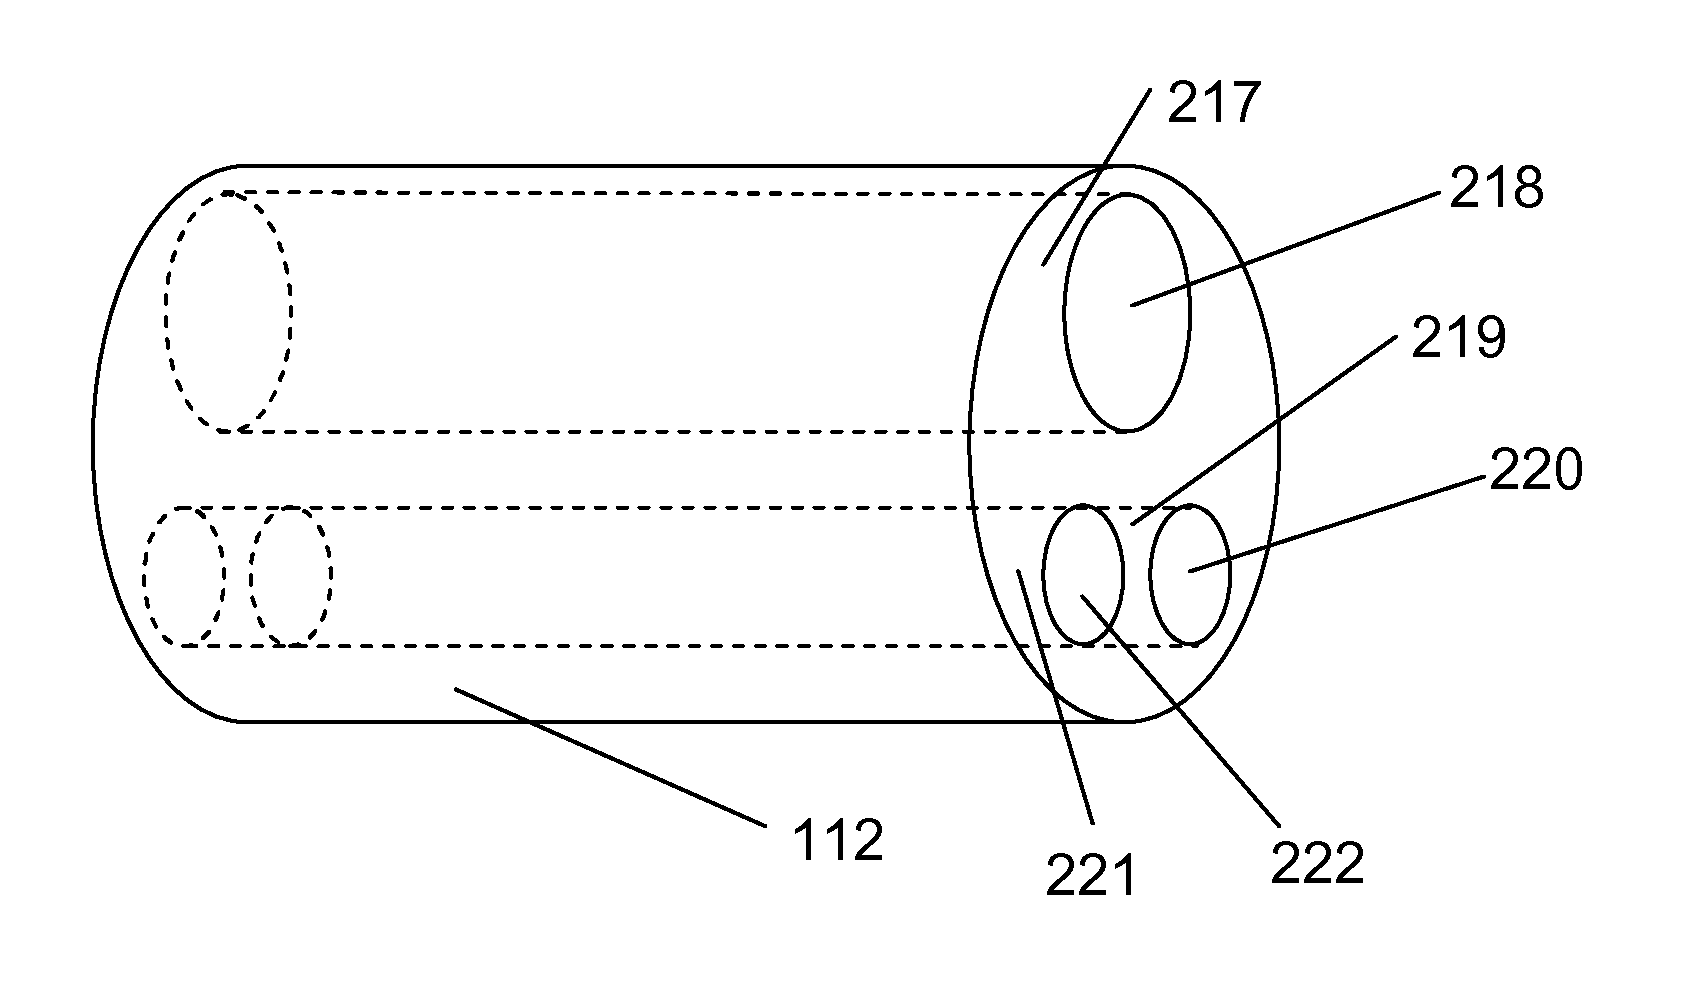 Apparatus for optical analysis of an associated tissue